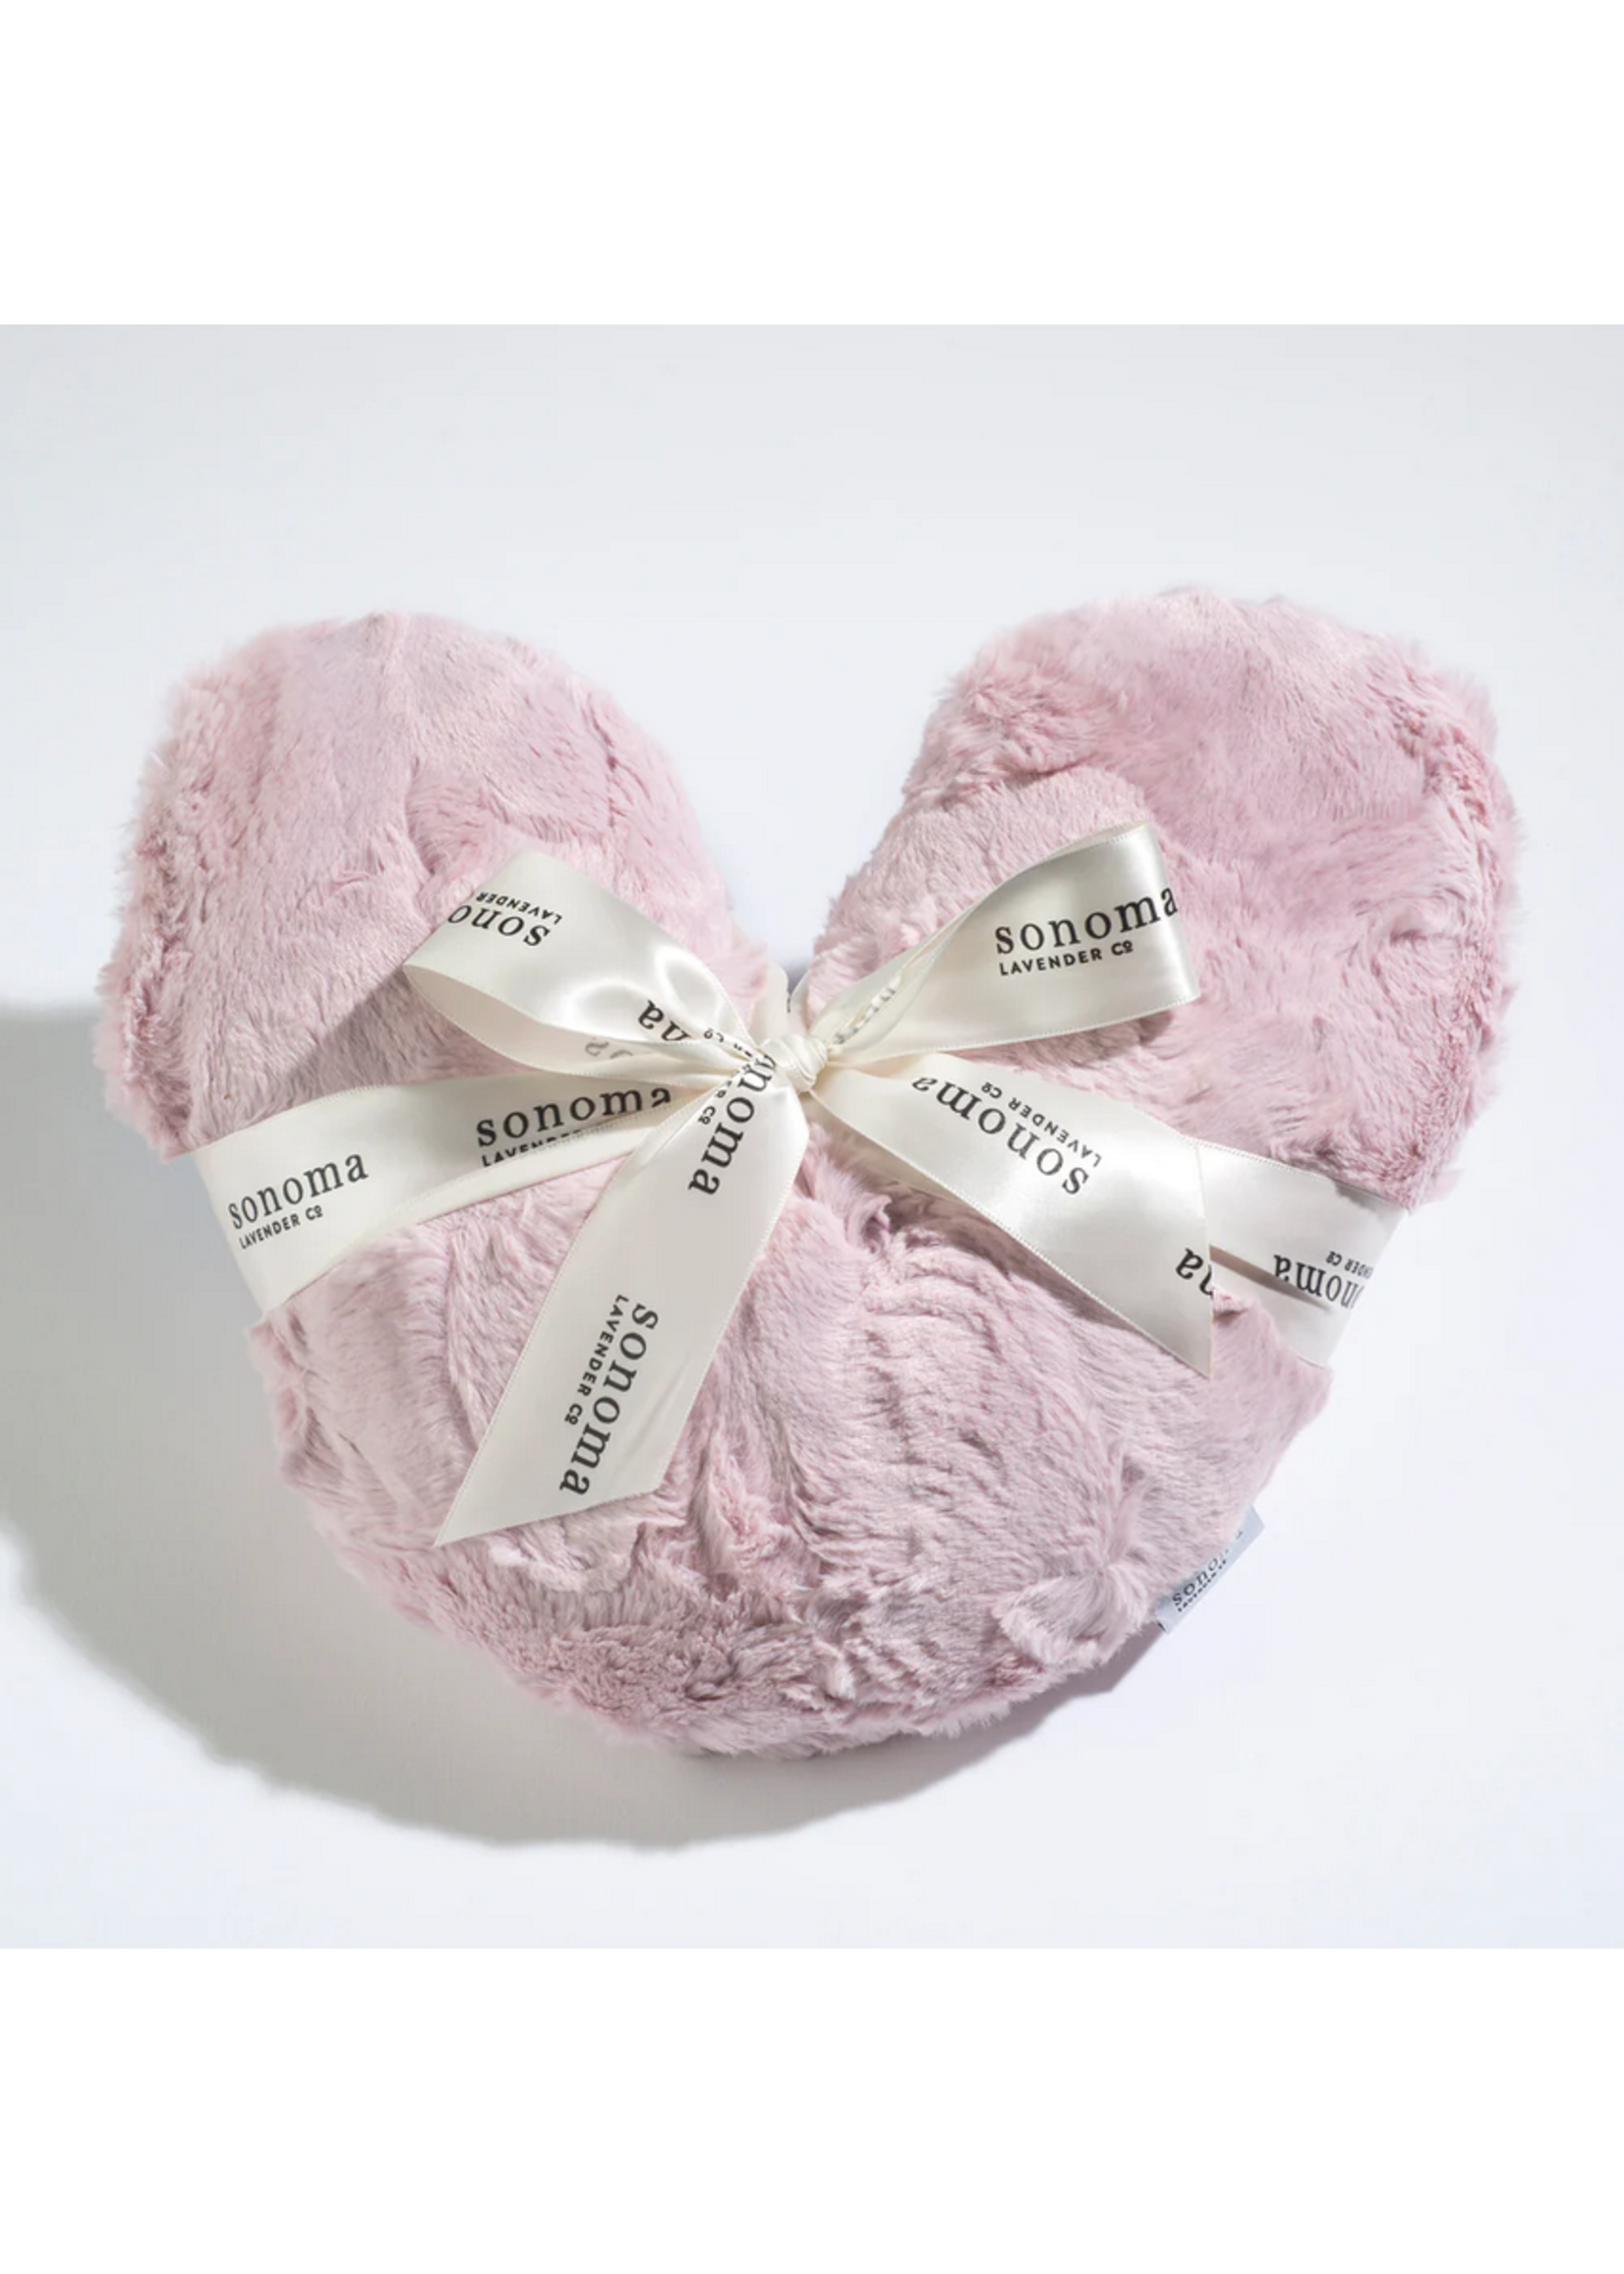 Sonoma Lavender Warming Heart Pillow Rosewater Pink